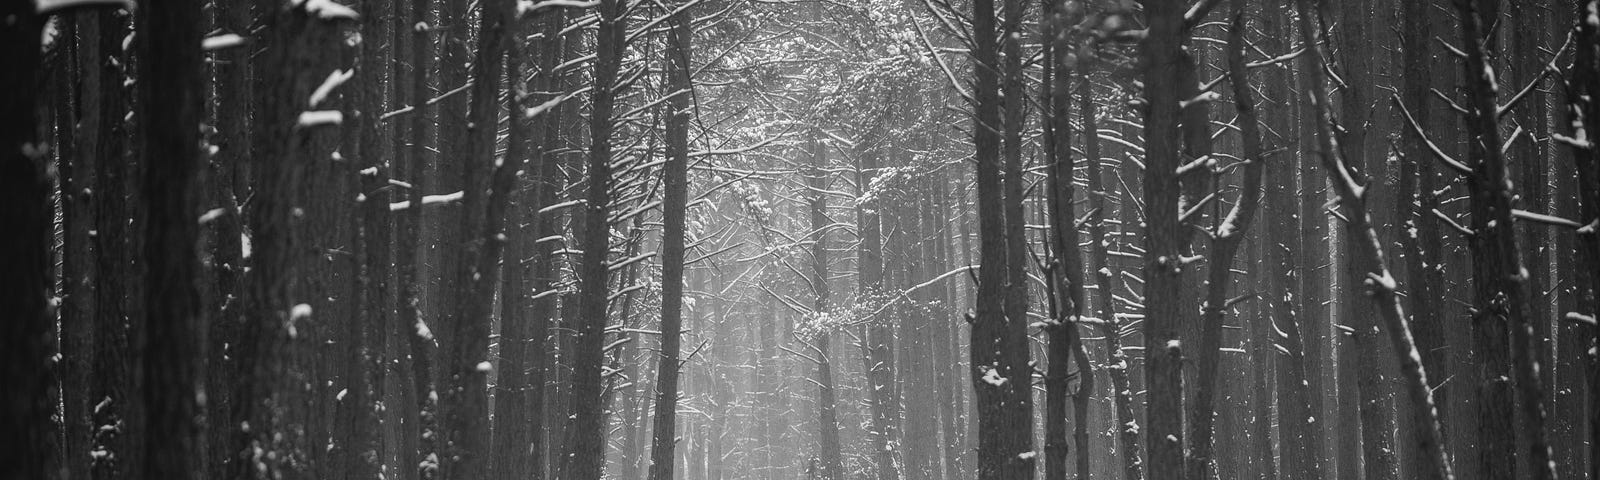 trees surrounding a snowy trail